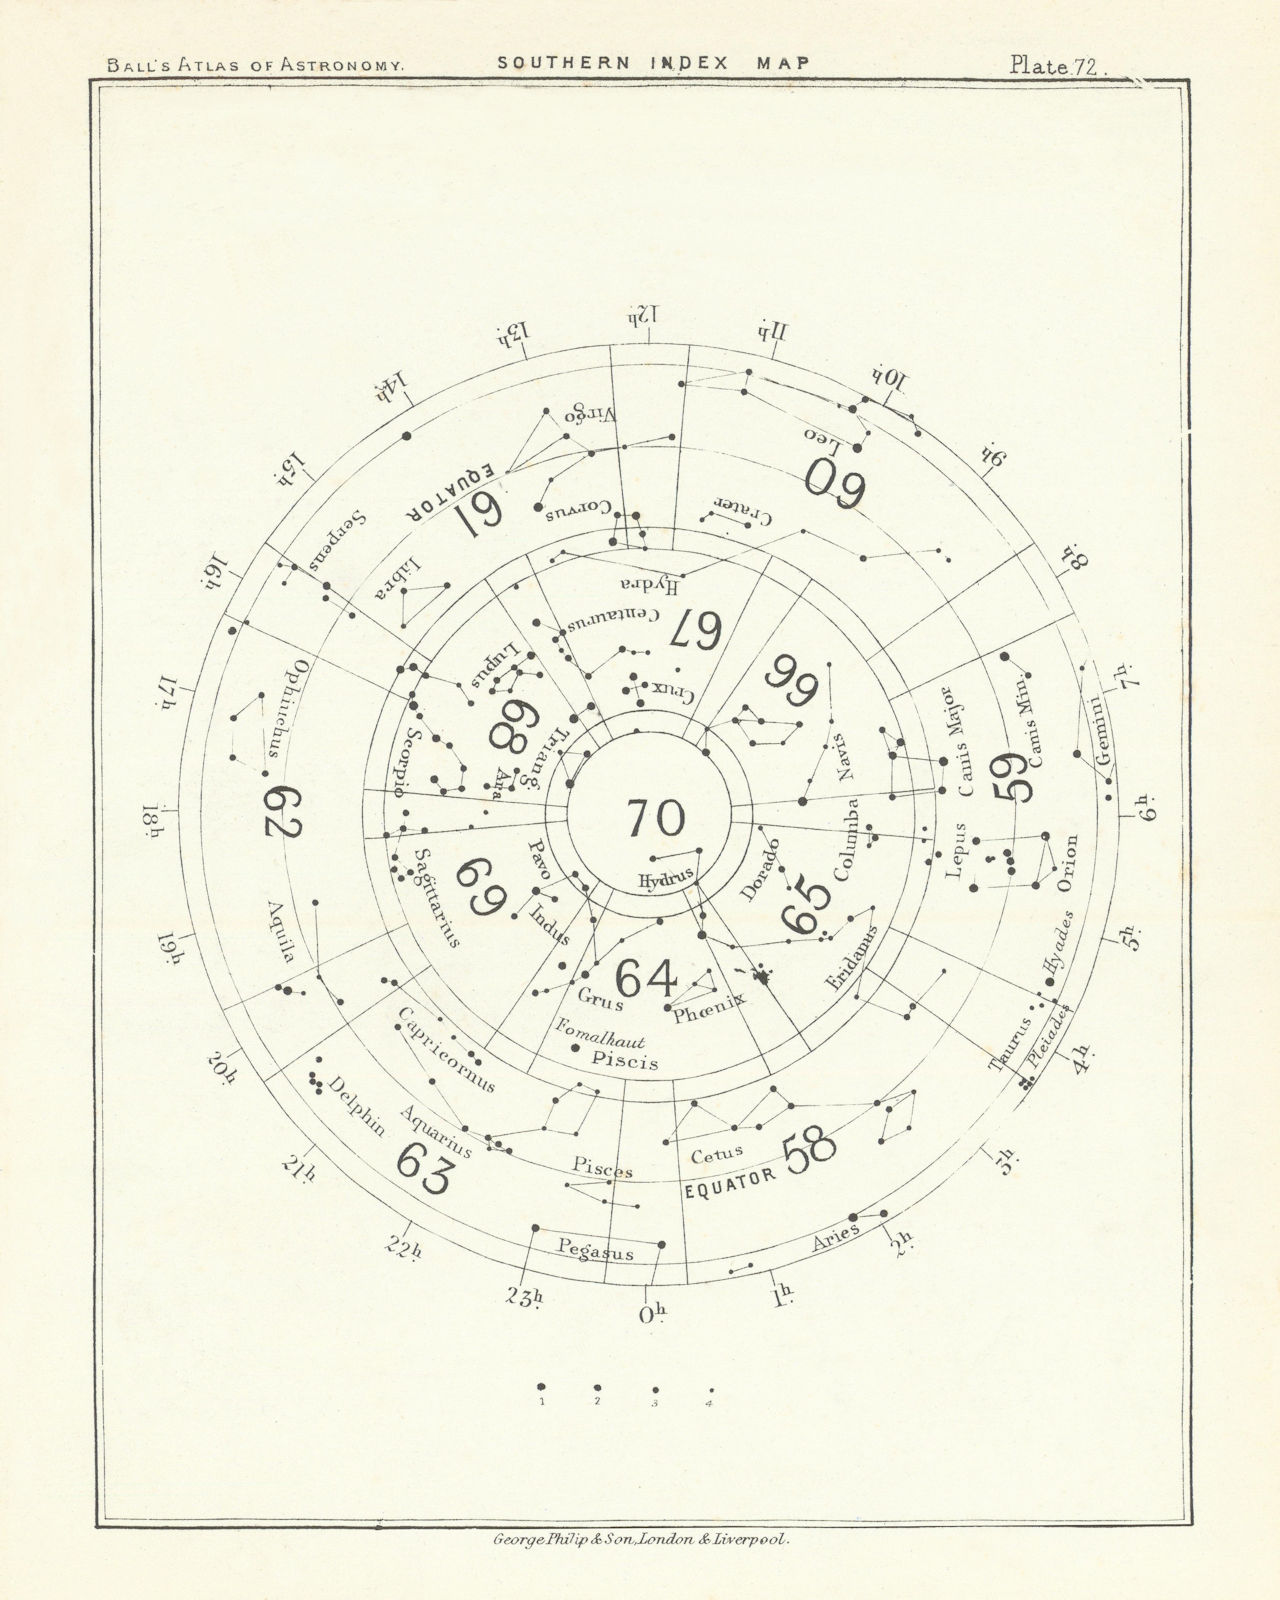 Associate Product Night Sky Star Chart. Southern Index Map by Robert Ball. Astronomy 1892